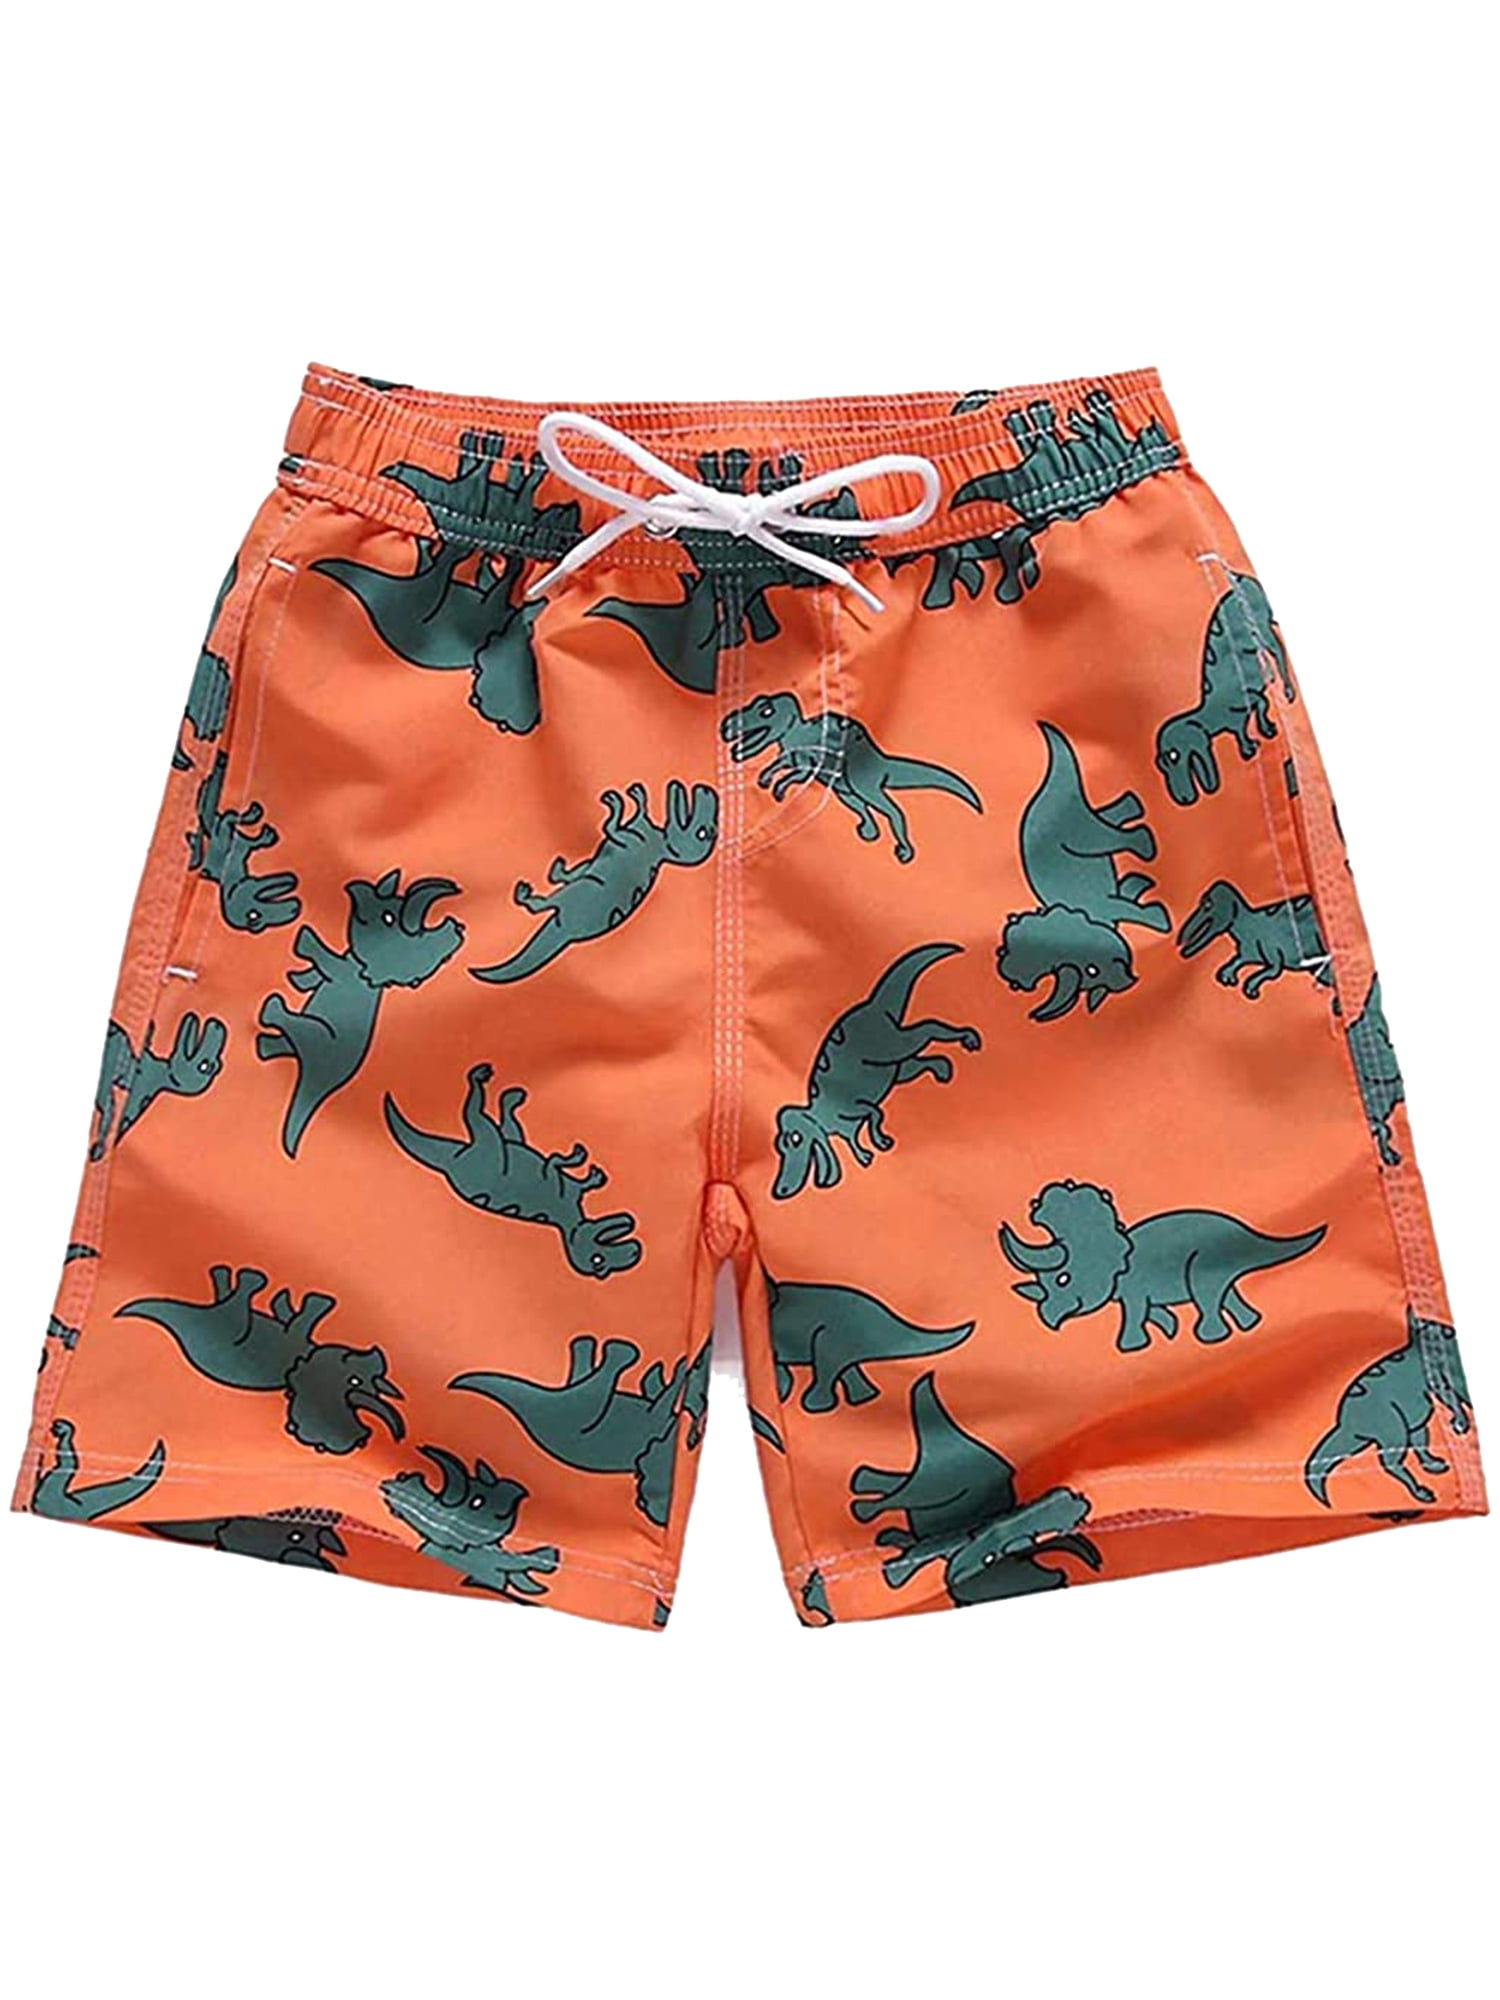 Boys Swim Trunks Pop and Colorful Dinosaurs Fossil Quick Dry Board Shorts Beach for 7-18 T 